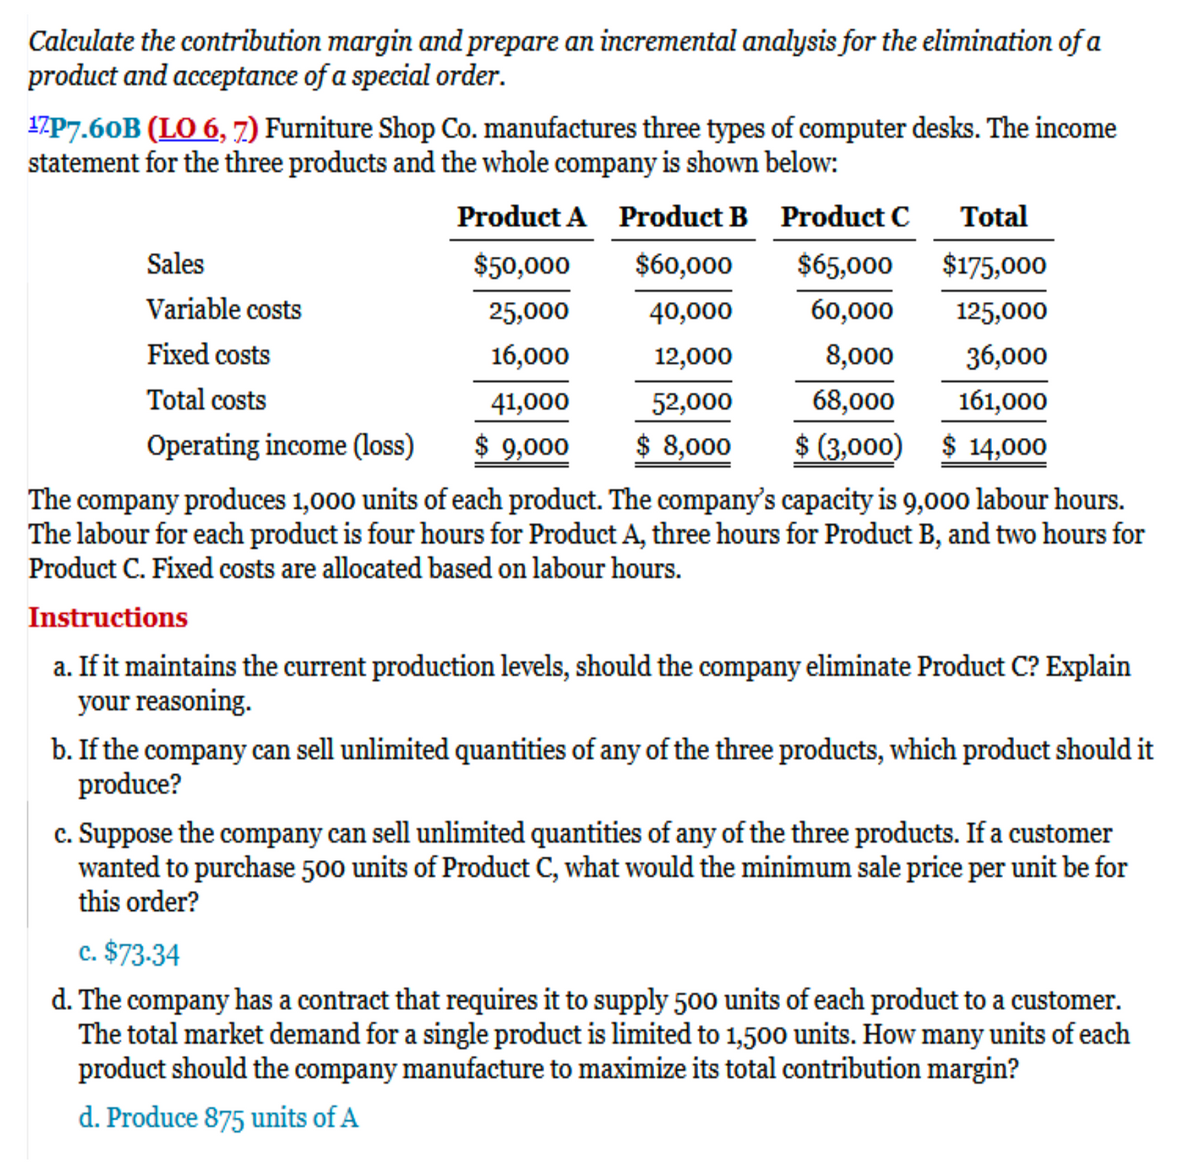 Calculate the contribution margin and prepare an incremental analysis for the elimination of a
product and acceptance of a special order.
17P7.60B (LO 6, 7) Furniture Shop Co. manufactures three types of computer desks. The income
statement for the three products and the whole company is shown below:
Product A Product B
$50,000
$60,000
25,000
40,000
16,000
12,000
41,000
52,000
$ 9,000
$ 8,000
Product C
Total
$65,000
$175,000
60,000
125,000
8,000
36,000
68,000
161,000
$ (3,000) $ 14,000
Sales
Variable costs
Fixed costs
Total costs
Operating income (loss)
The company produces 1,000 units of each product. The company's capacity is 9,000 labour hours.
The labour for each product is four hours for Product A, three hours for Product B, and two hours for
Product C. Fixed costs are allocated based on labour hours.
Instructions
a. If it maintains the current production levels, should the company eliminate Product C? Explain
your reasoning.
b. If the company can sell unlimited quantities of any of the three products, which product should it
produce?
c. Suppose the company can sell unlimited quantities of any of the three products. If a customer
wanted to purchase 500 units of Product C, what would the minimum sale price per unit be for
this order?
c. $73.34
d. The company has a contract that requires it to supply 500 units of each product to a customer.
The total market demand for a single product is limited to 1,500 units. How many units of each
product should the company manufacture to maximize its total contribution margin?
d. Produce 875 units of A